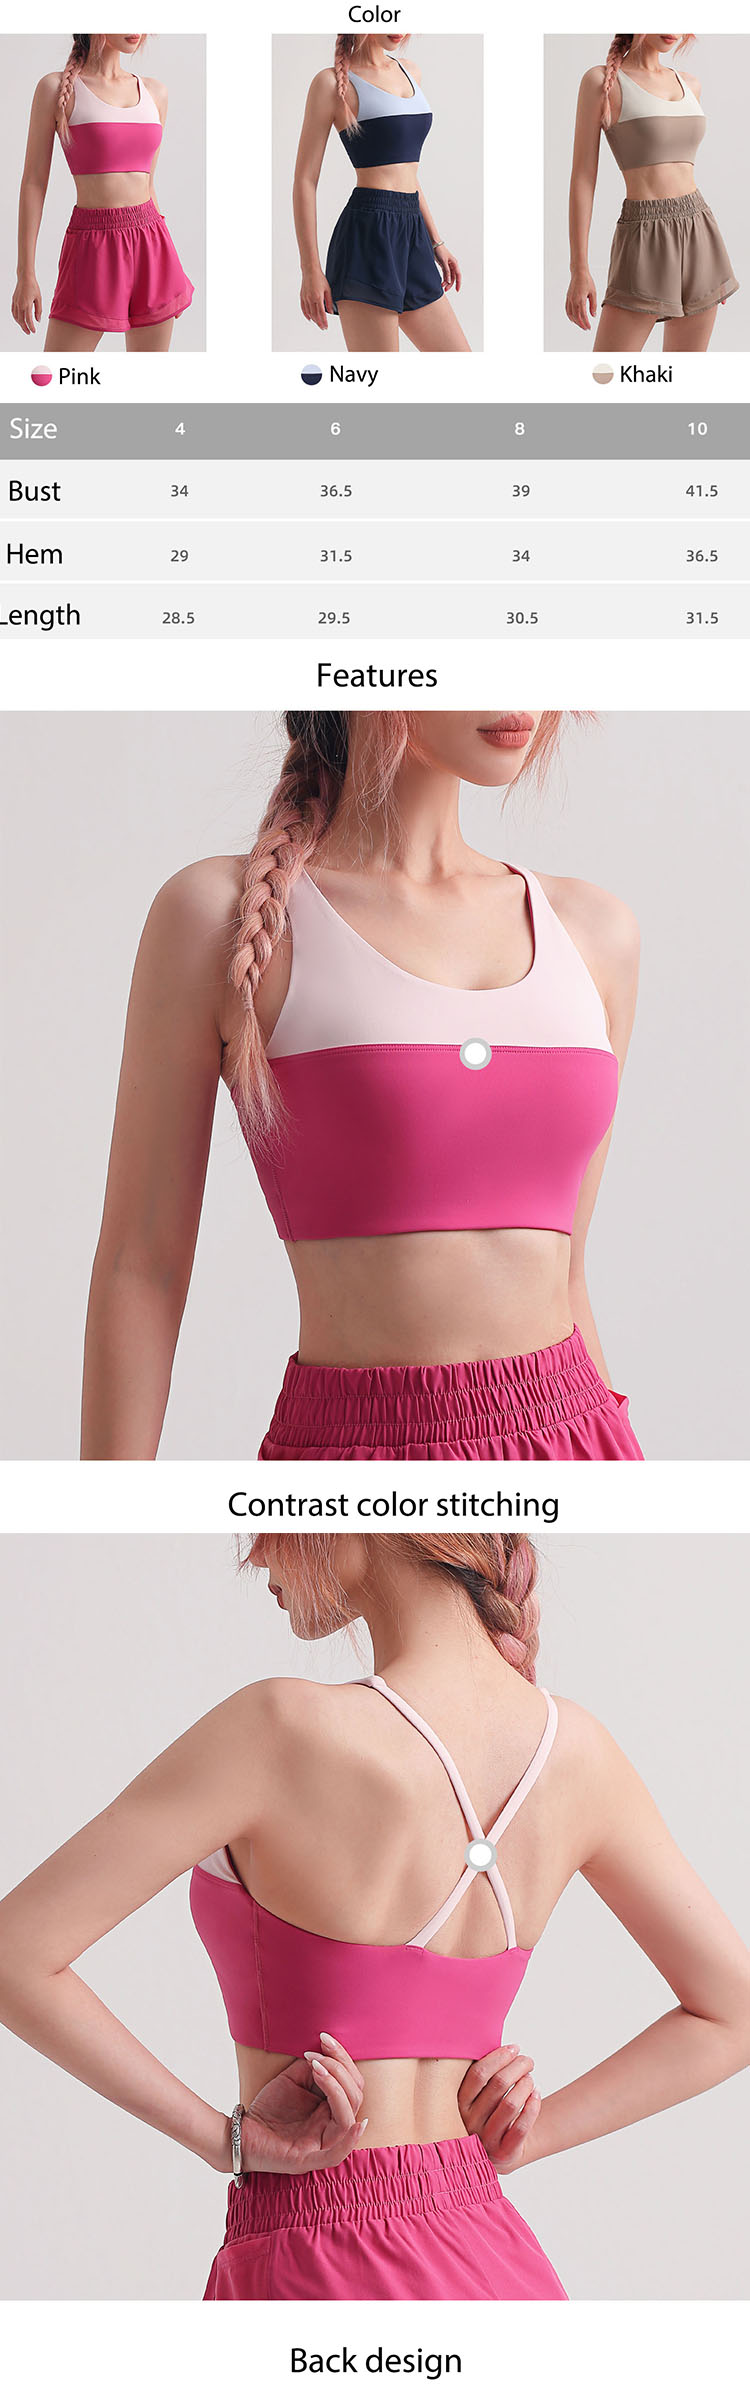 Hot women in sports bras is one of the commonly used design elements of underwear